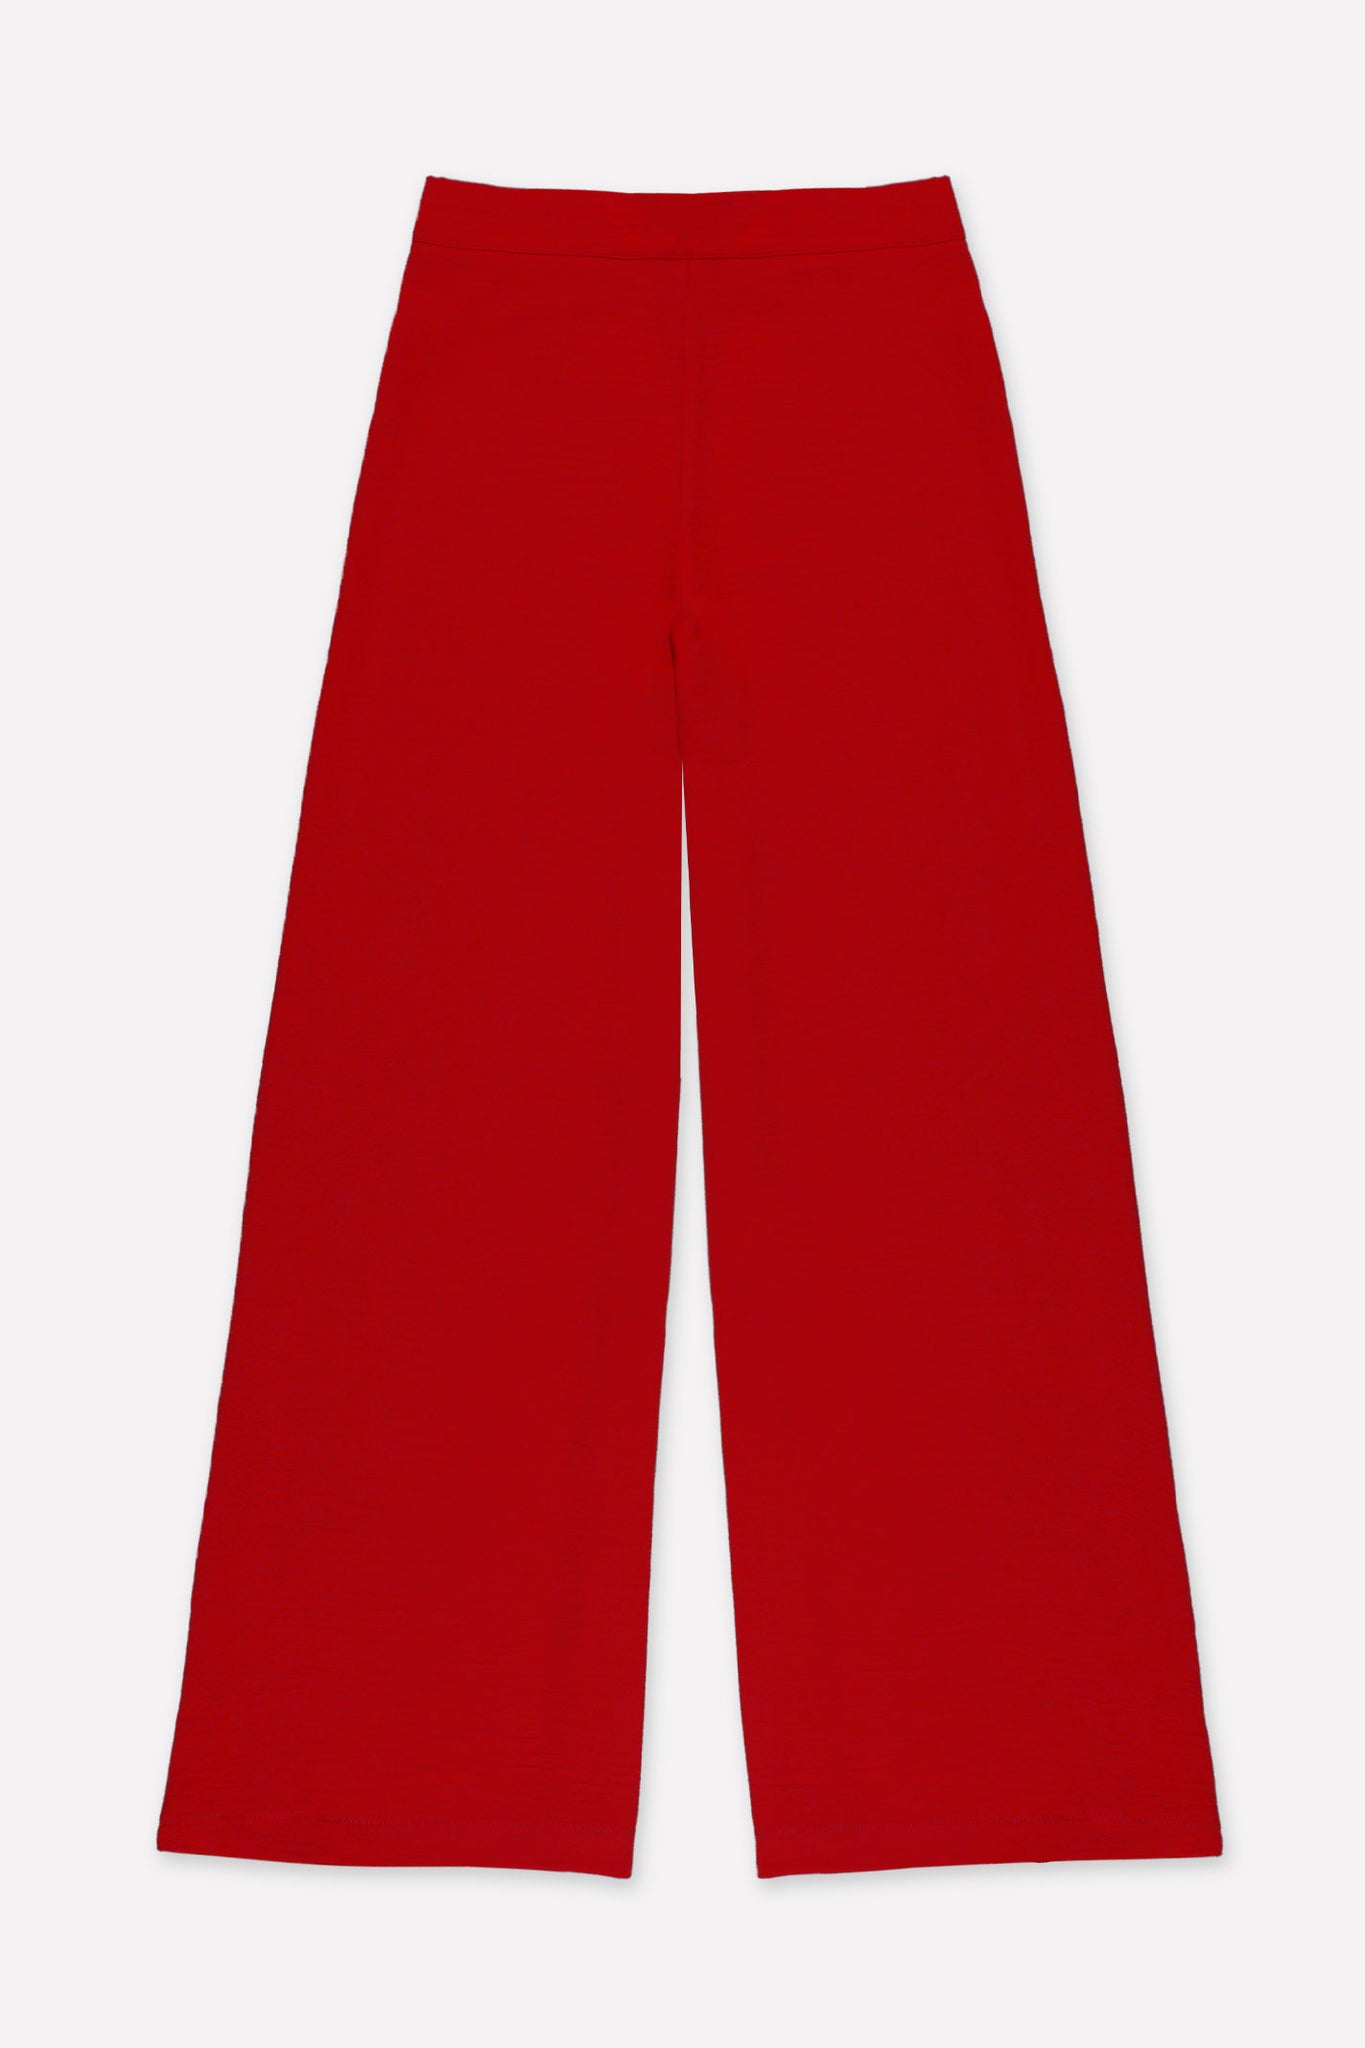 L.1191 - MOTION PANT - Red